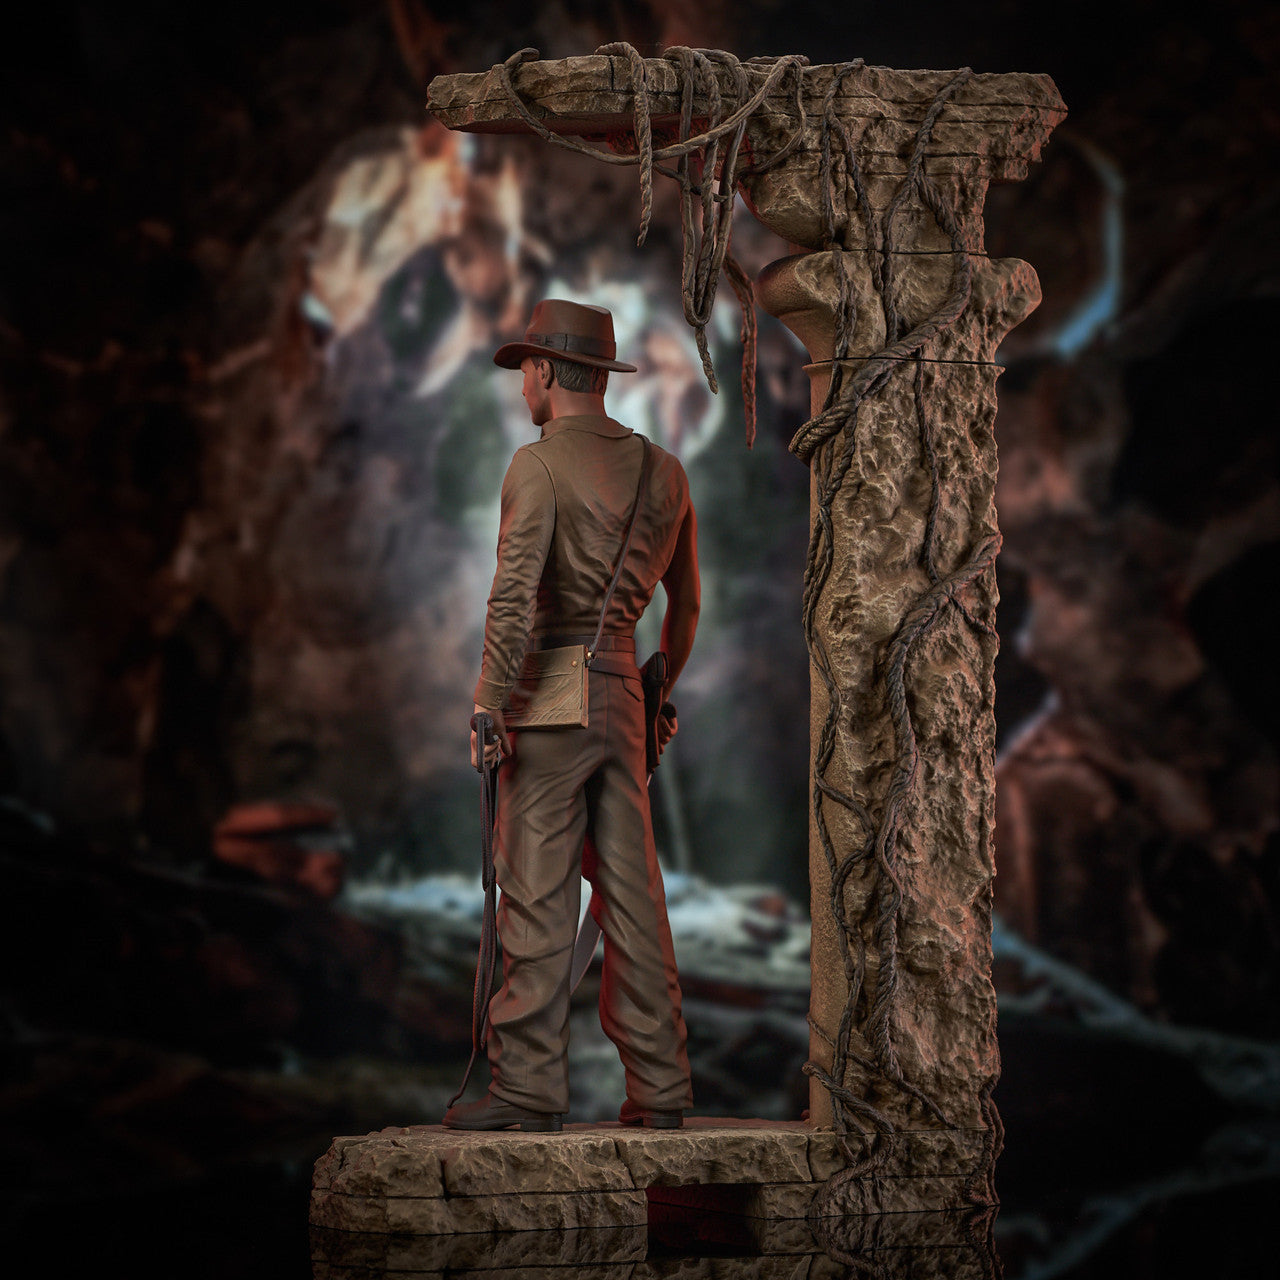 Indiana Jones and the Temple of Doom Premier Collection 1:7 Scale Statue by Diamond Gallery -Diamond Gallery - India - www.superherotoystore.com